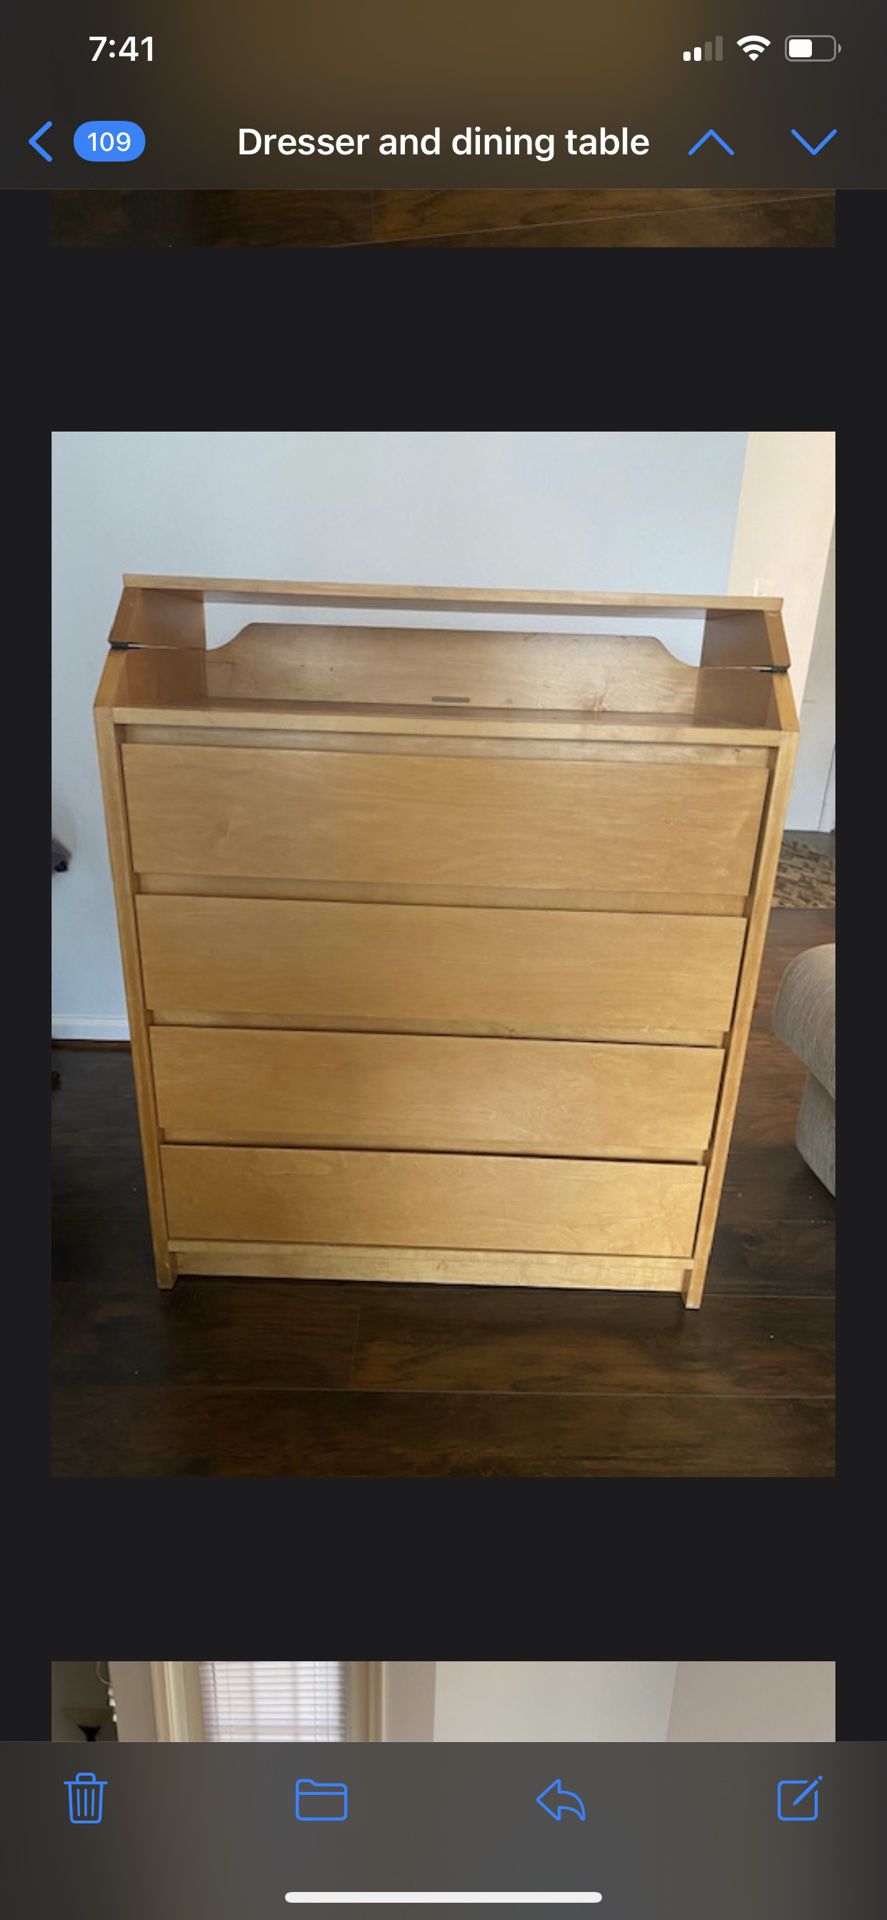 Dresser/baby Changing Table 